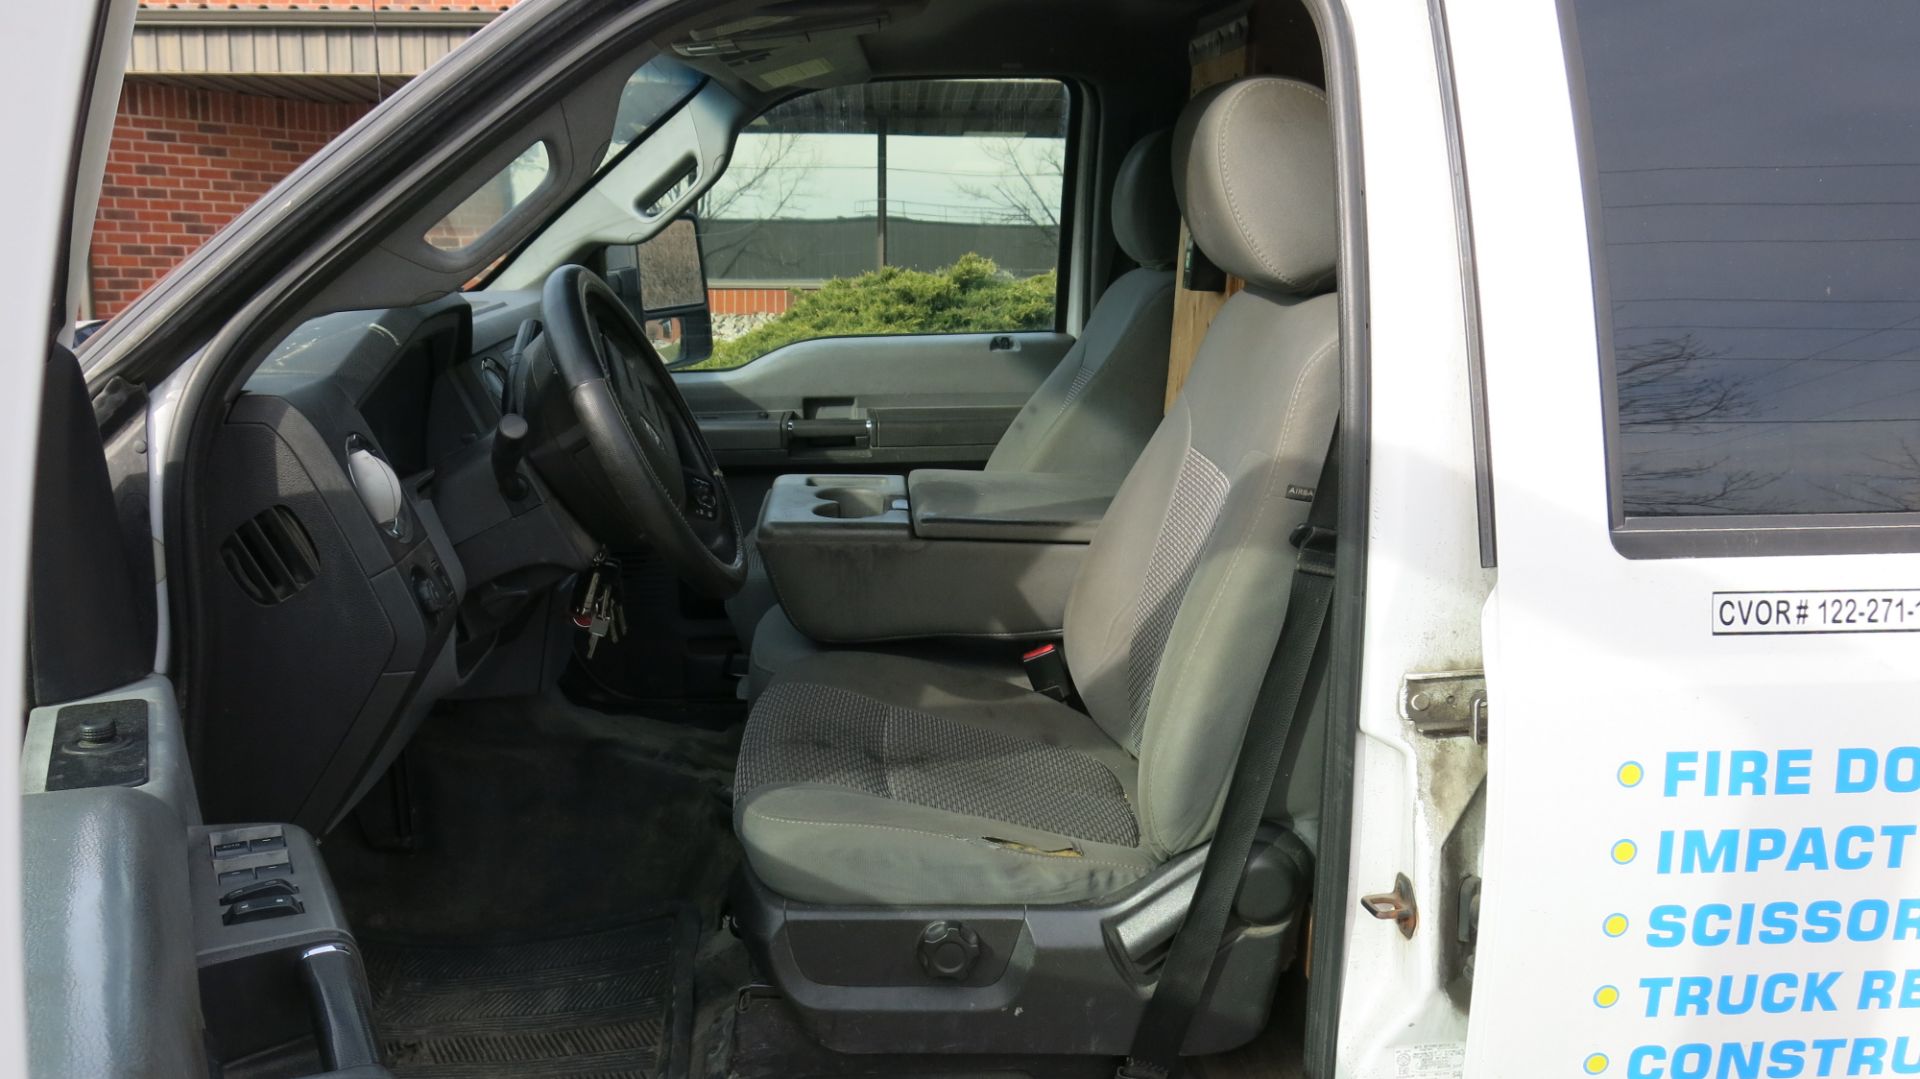 2012, FORD, F350, SUPERDUTY, 1 TON PICKUP TRUCK - Image 11 of 27